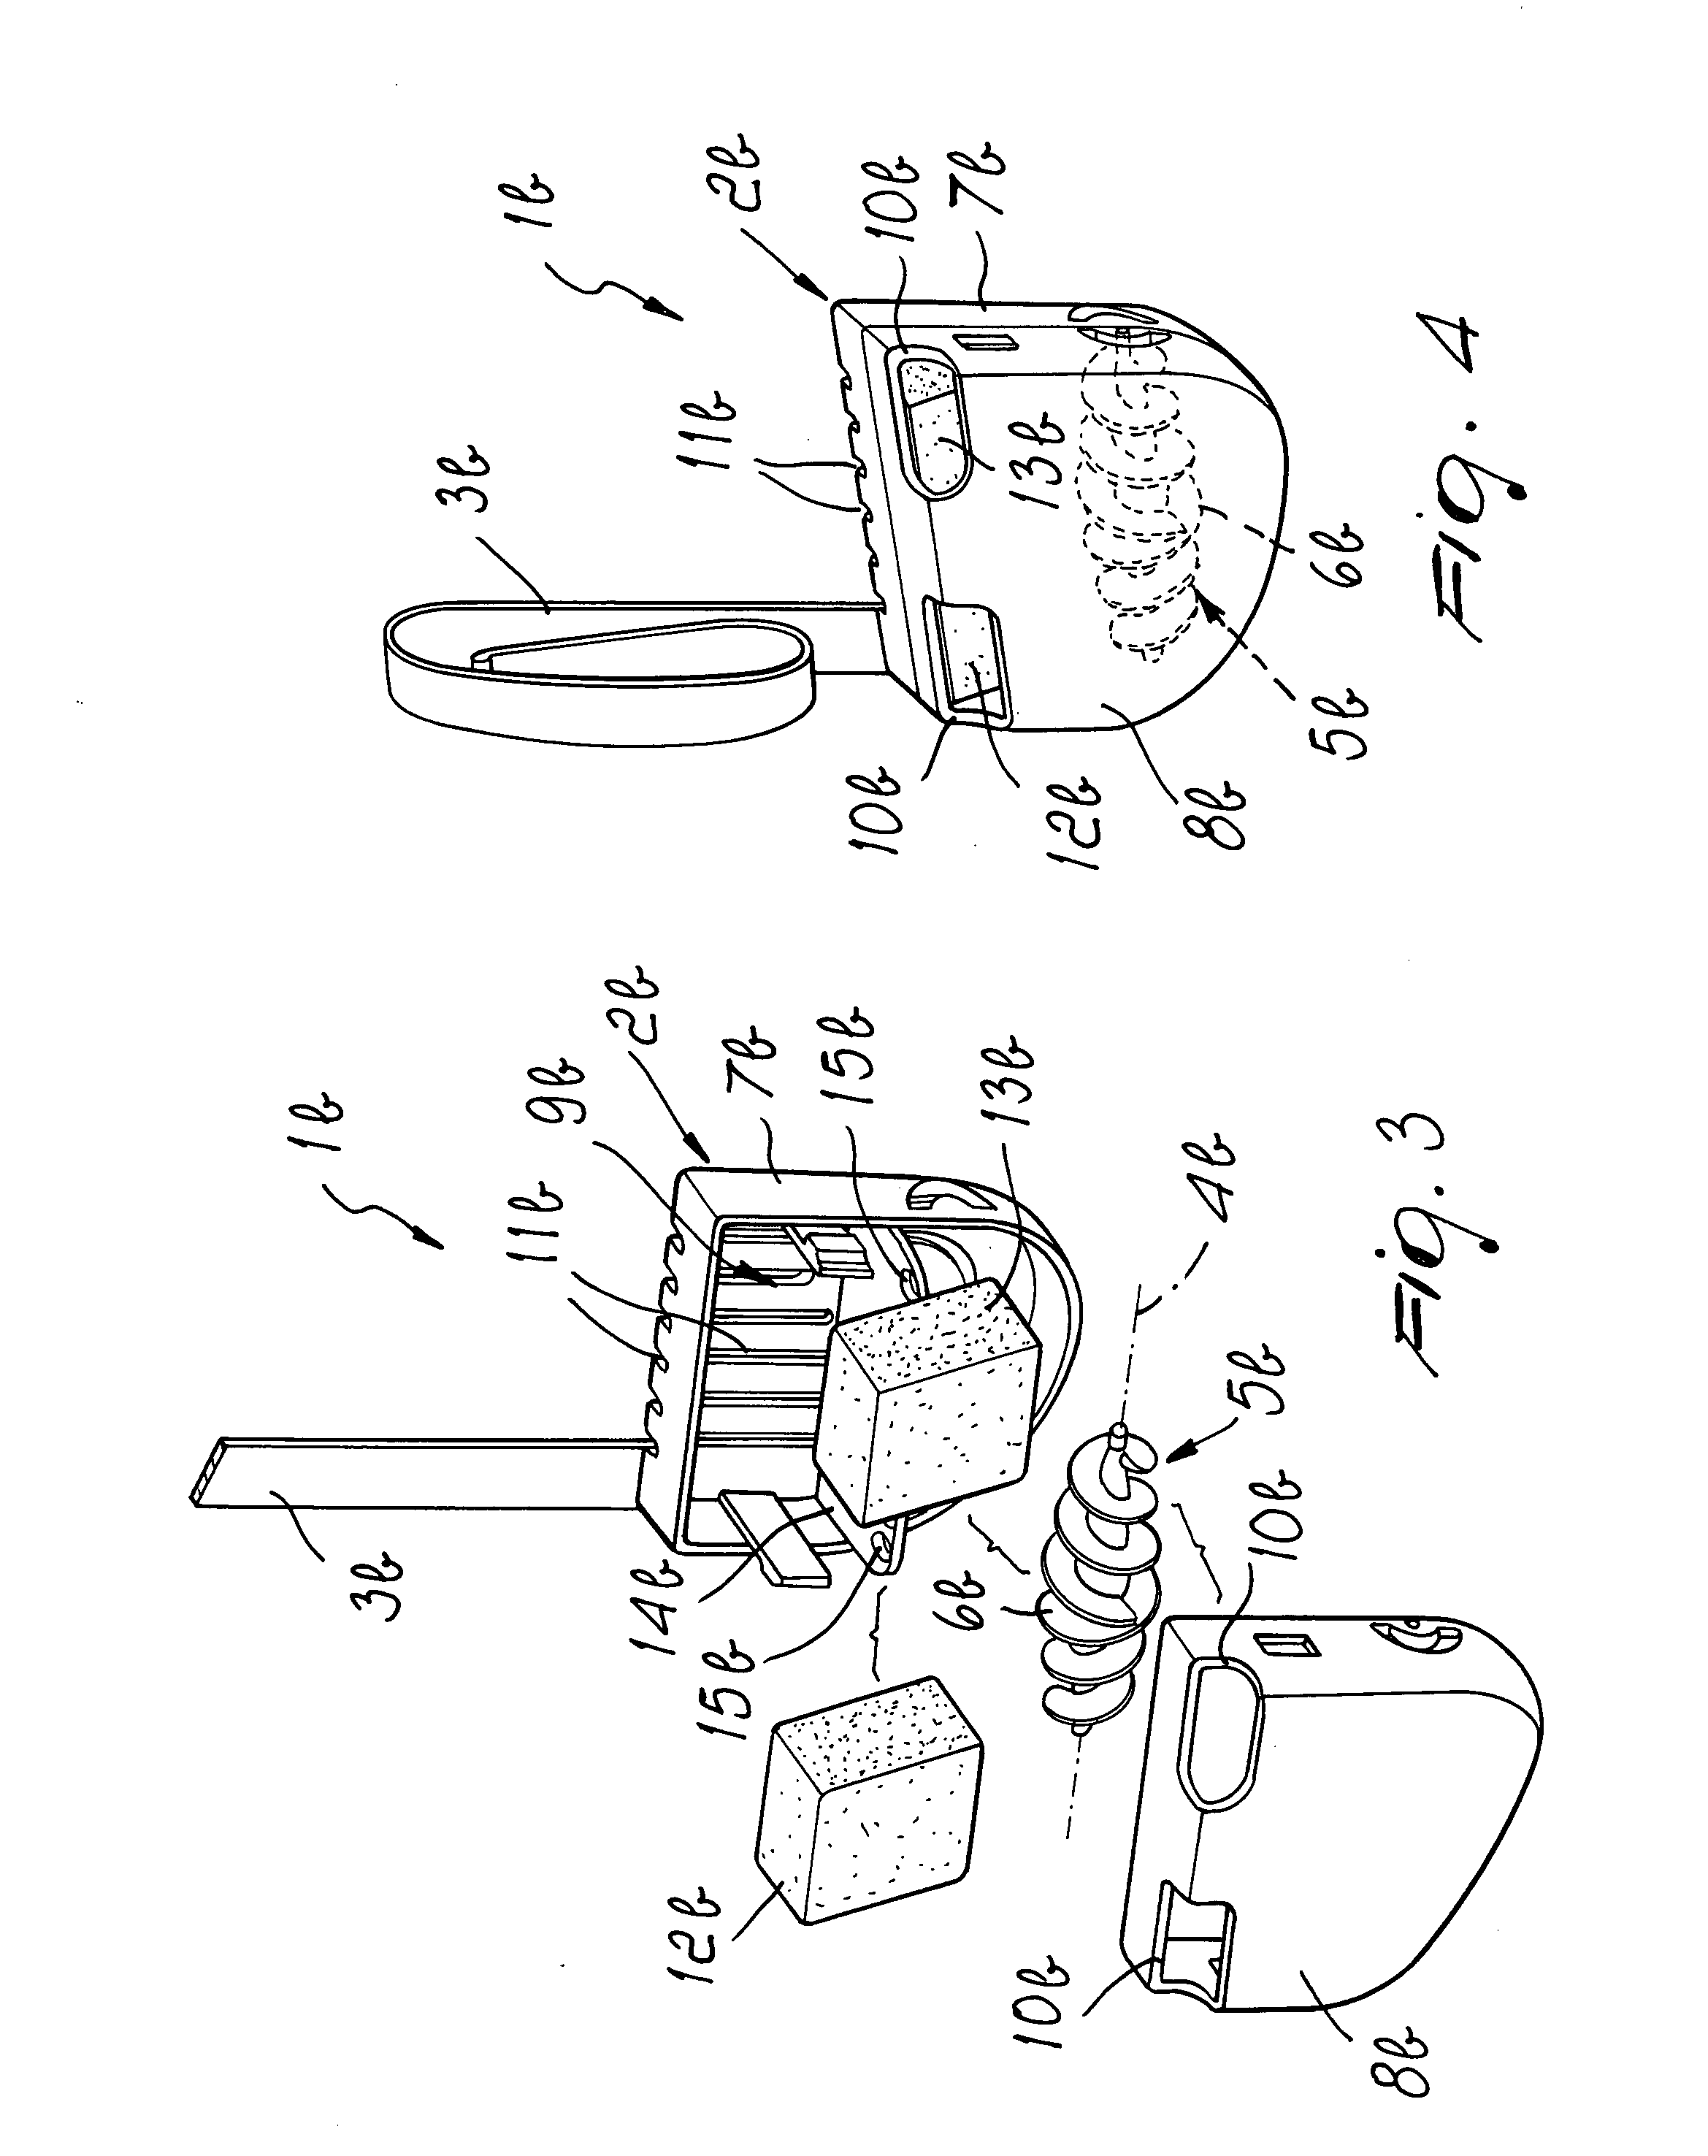 Device for dispensing in the flushing water and/or for mixing with the flushing water detergent and/or sanitizing and/or deodorant products, in toilet bowls or hydraulic and sanitary fixtures in general